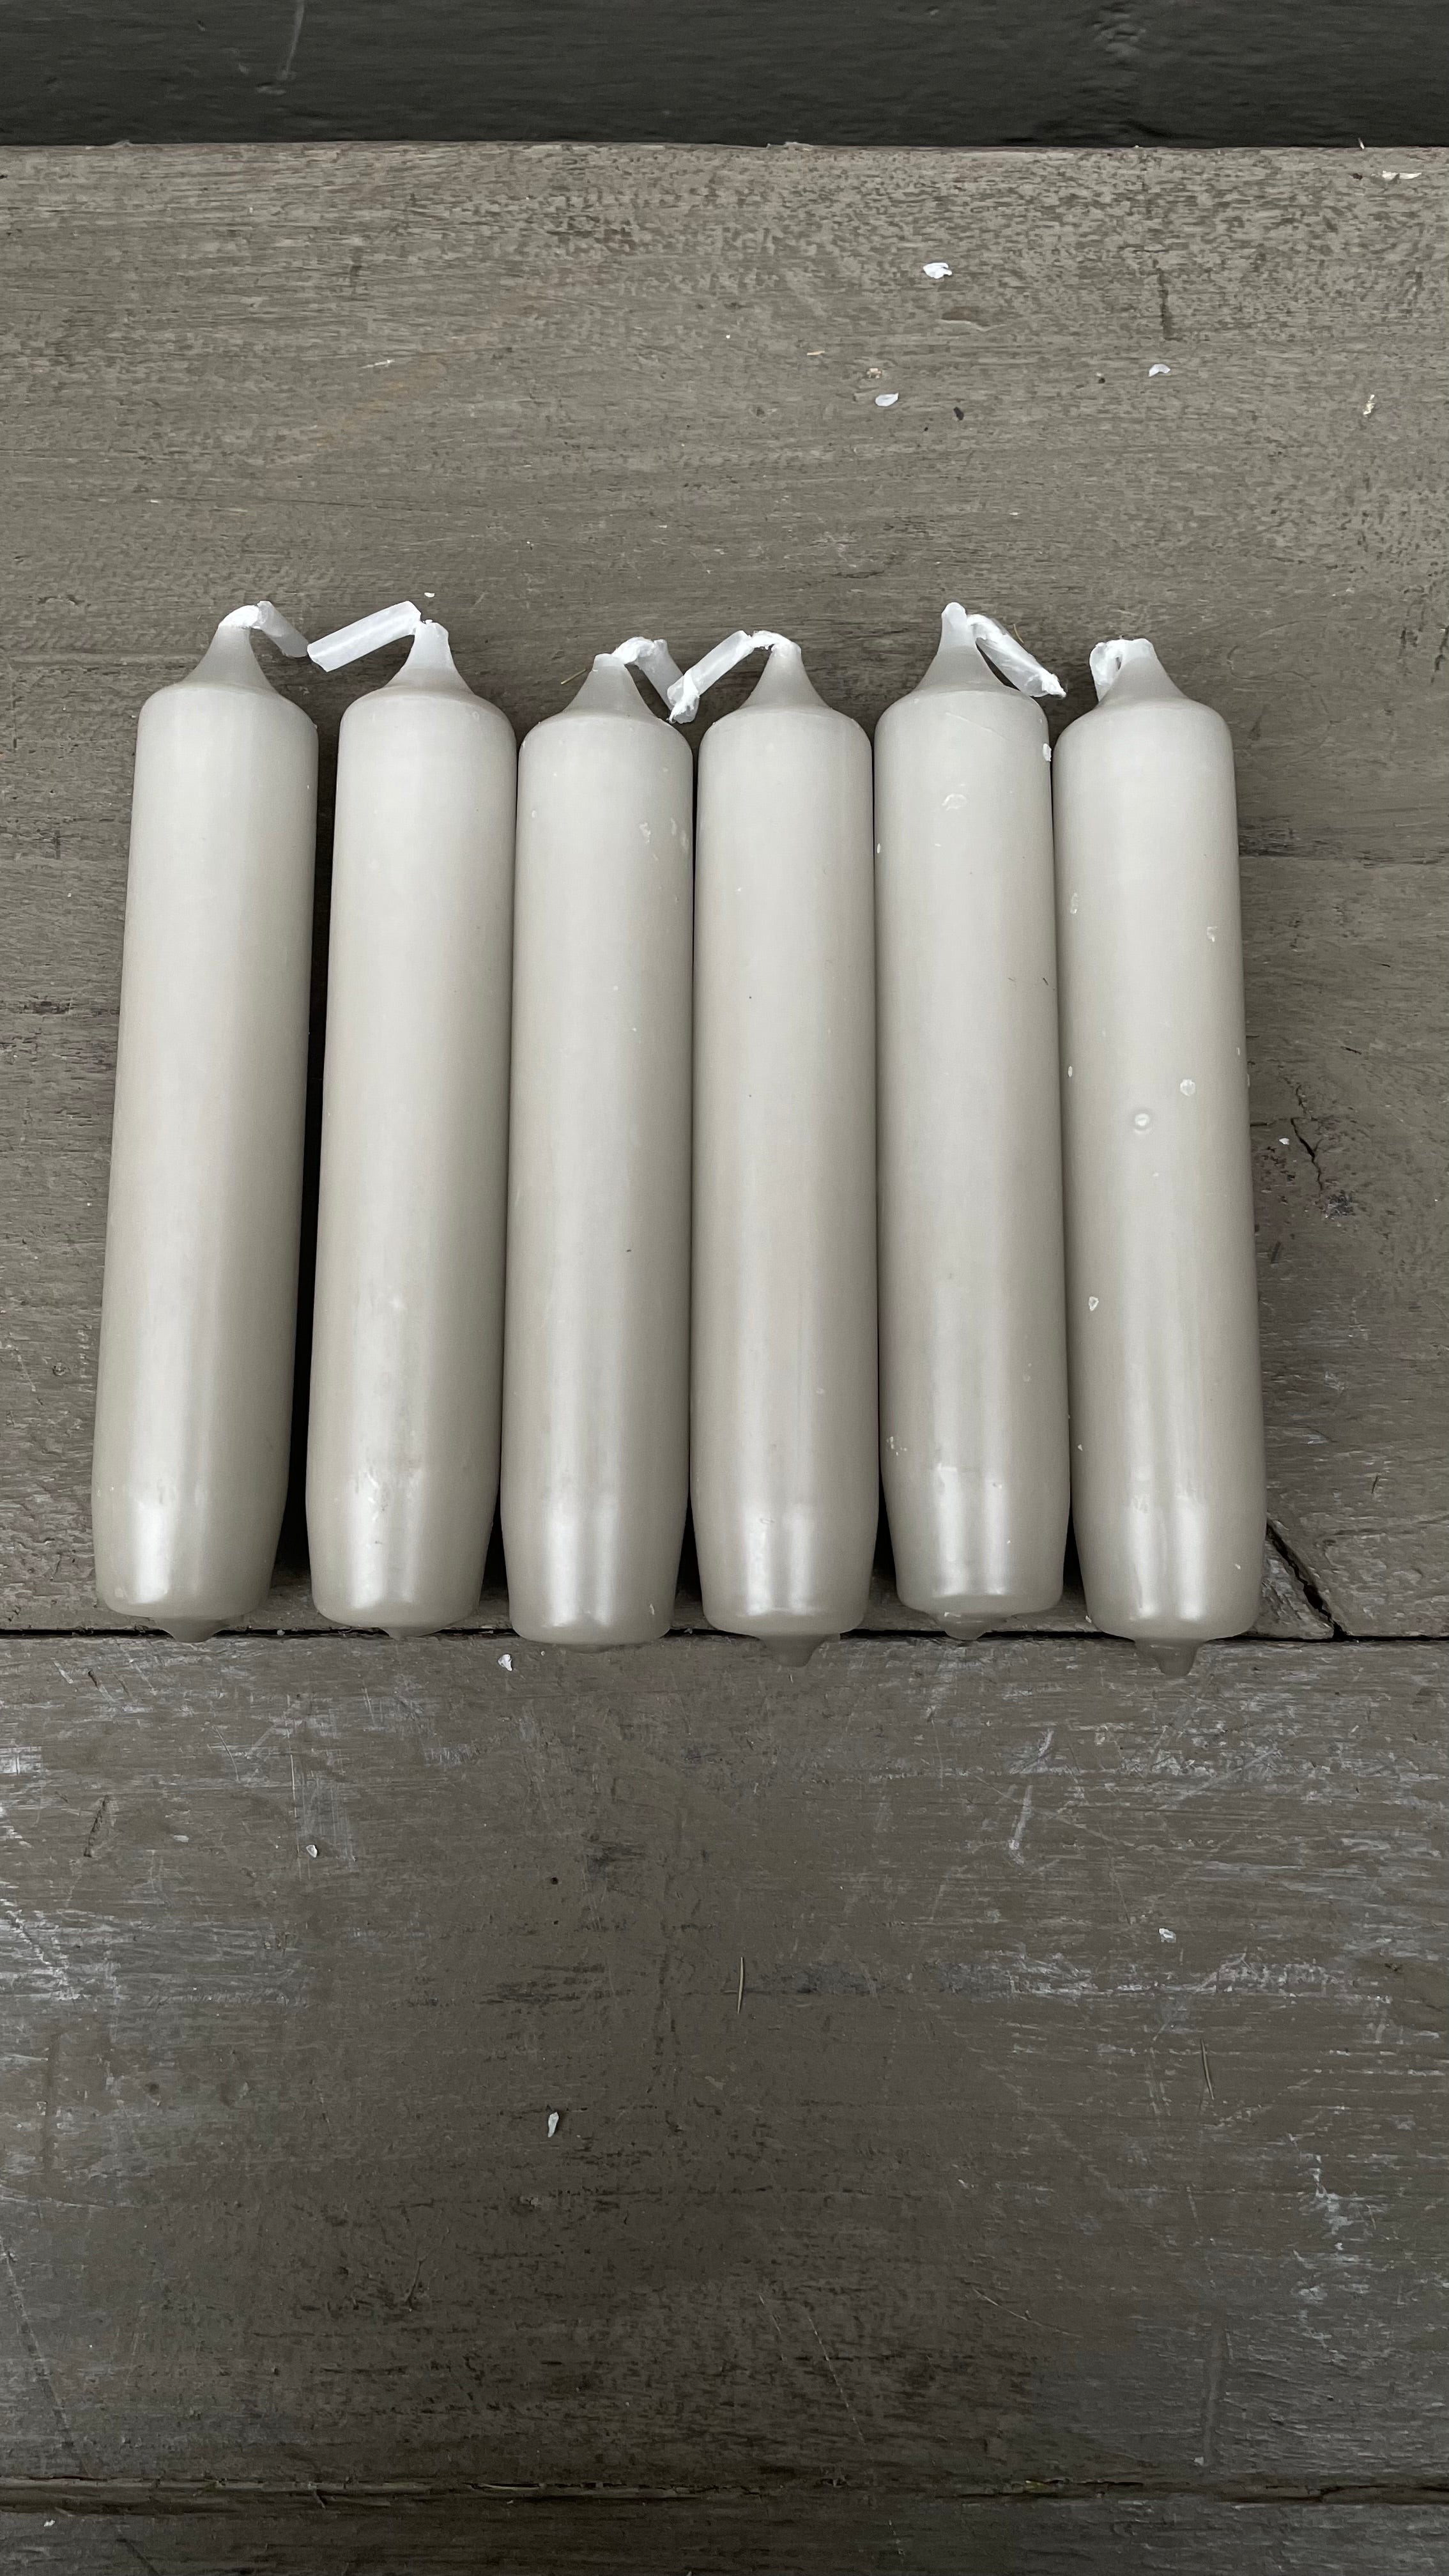 Set of candles